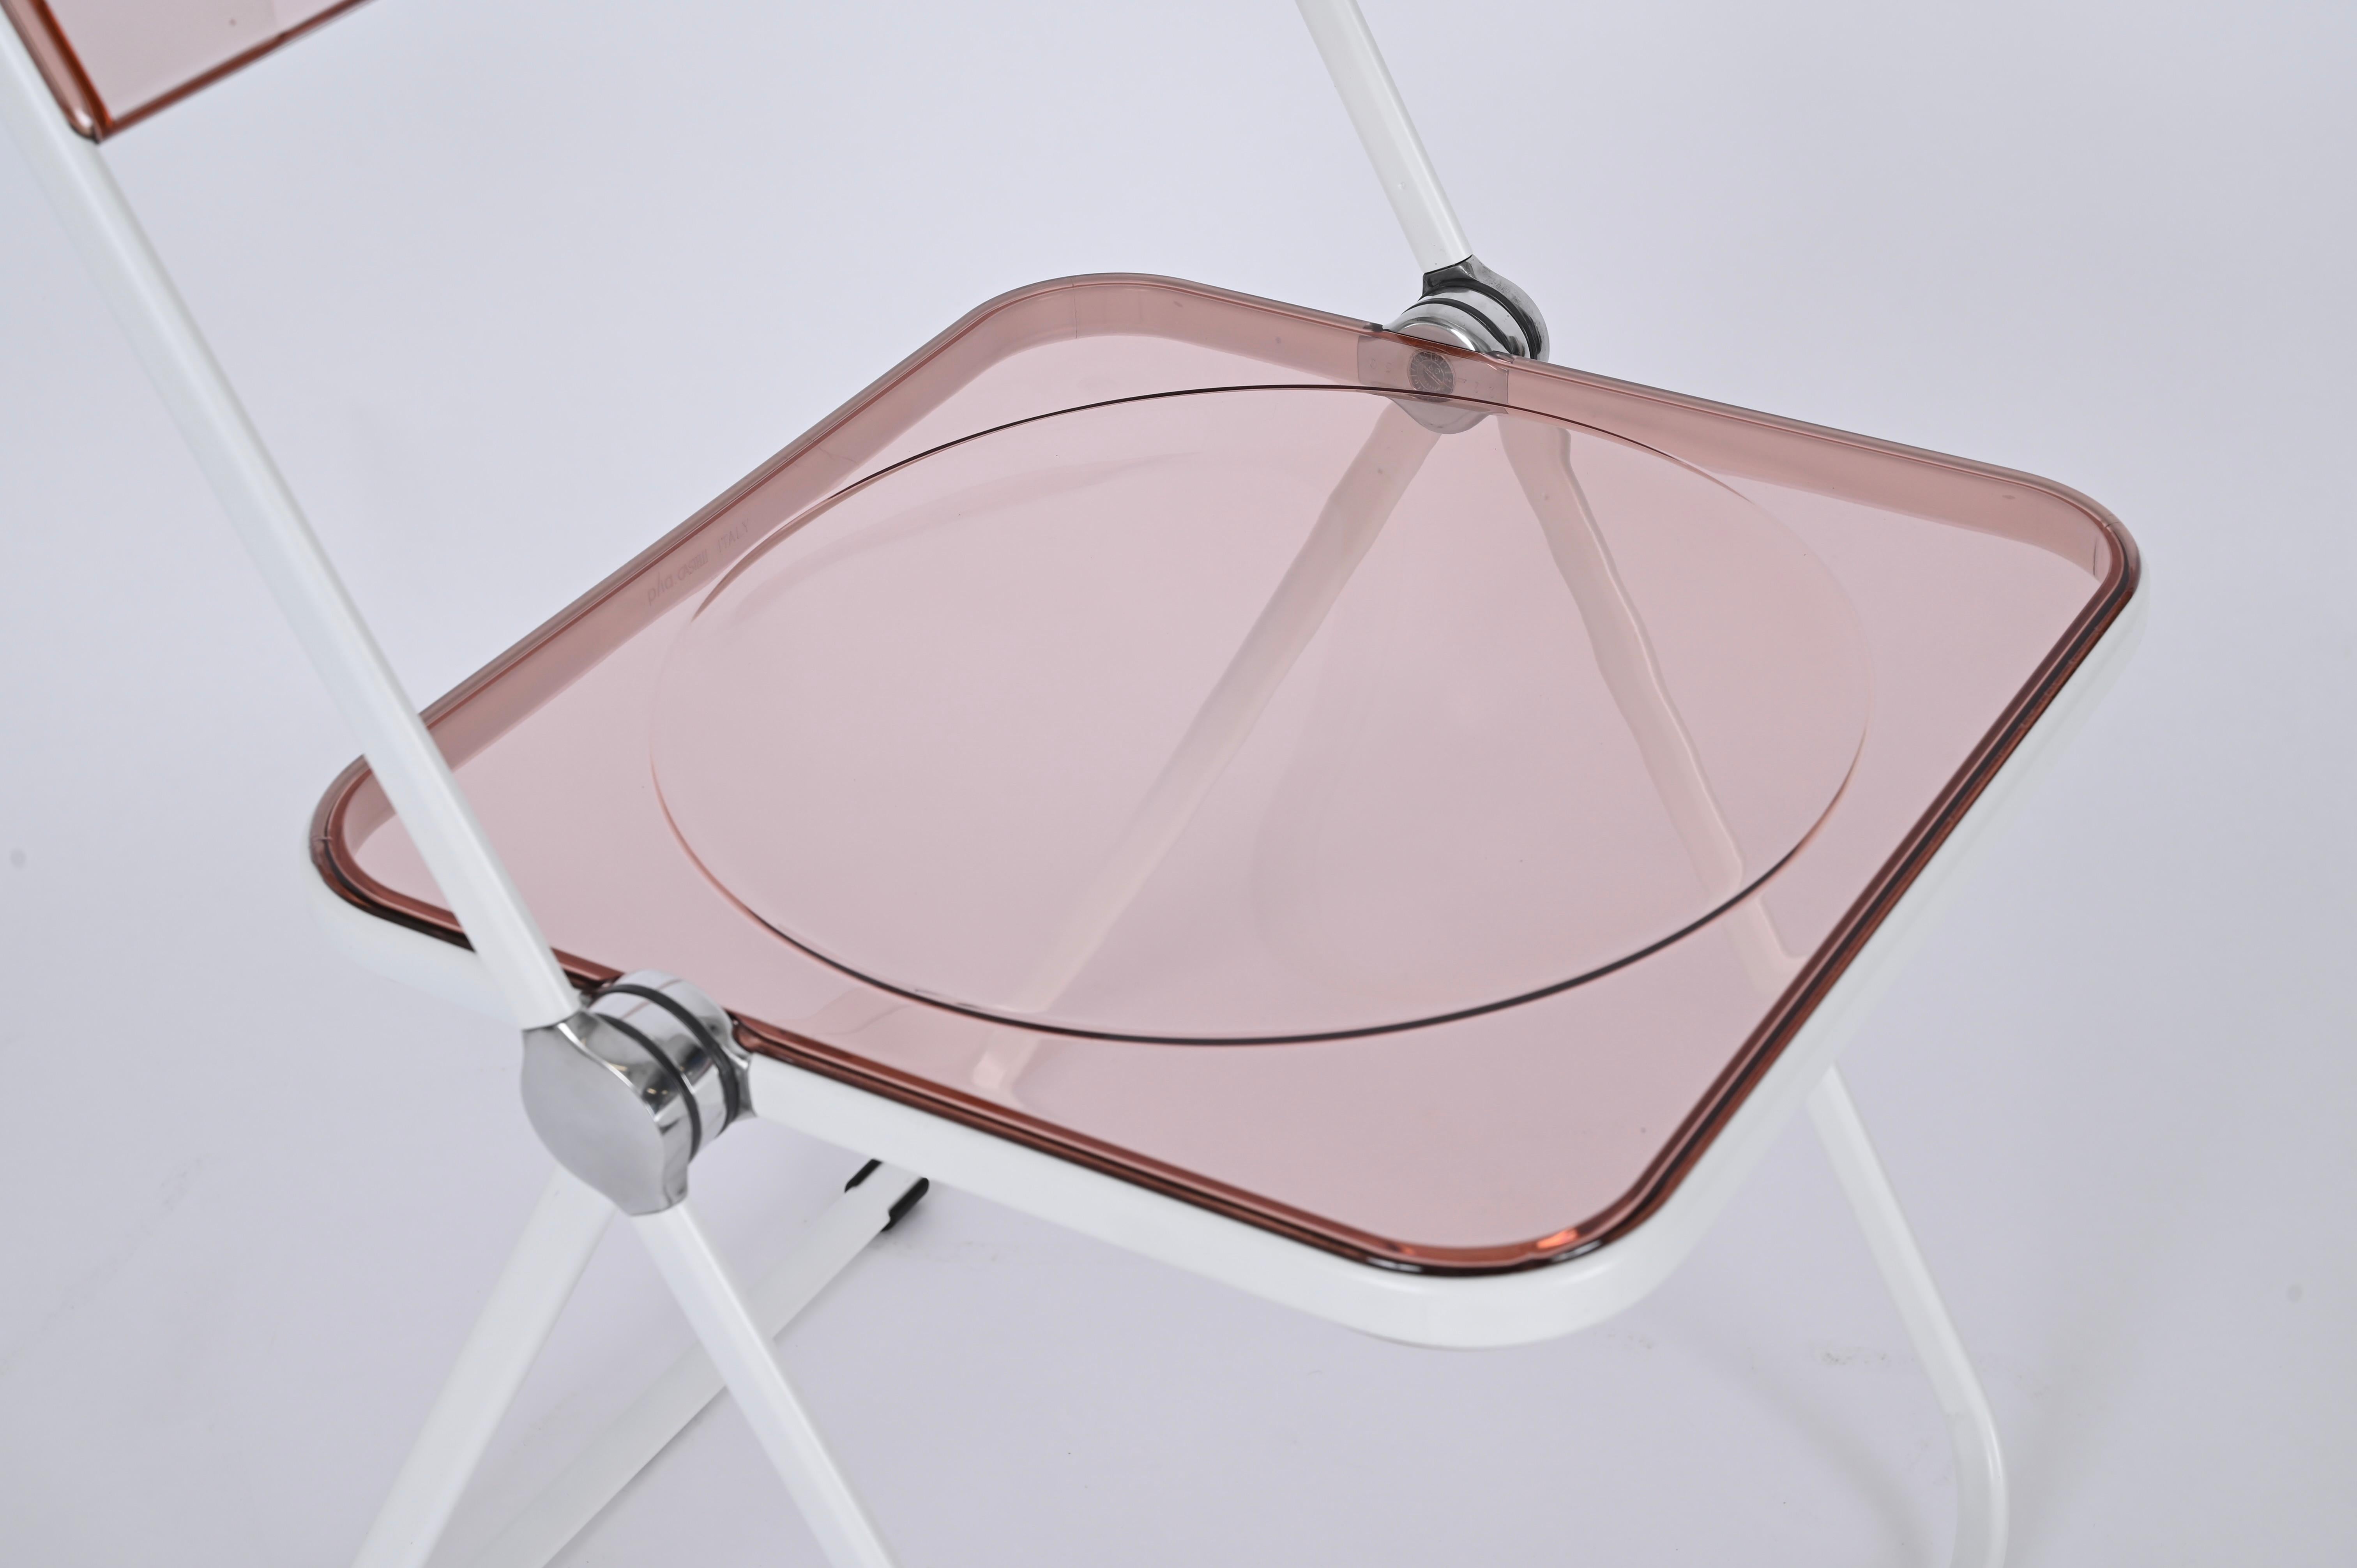 Giancarlo Piretti Lucite Pink and White Folding Plia Chairs for Castelli, 1970s For Sale 8